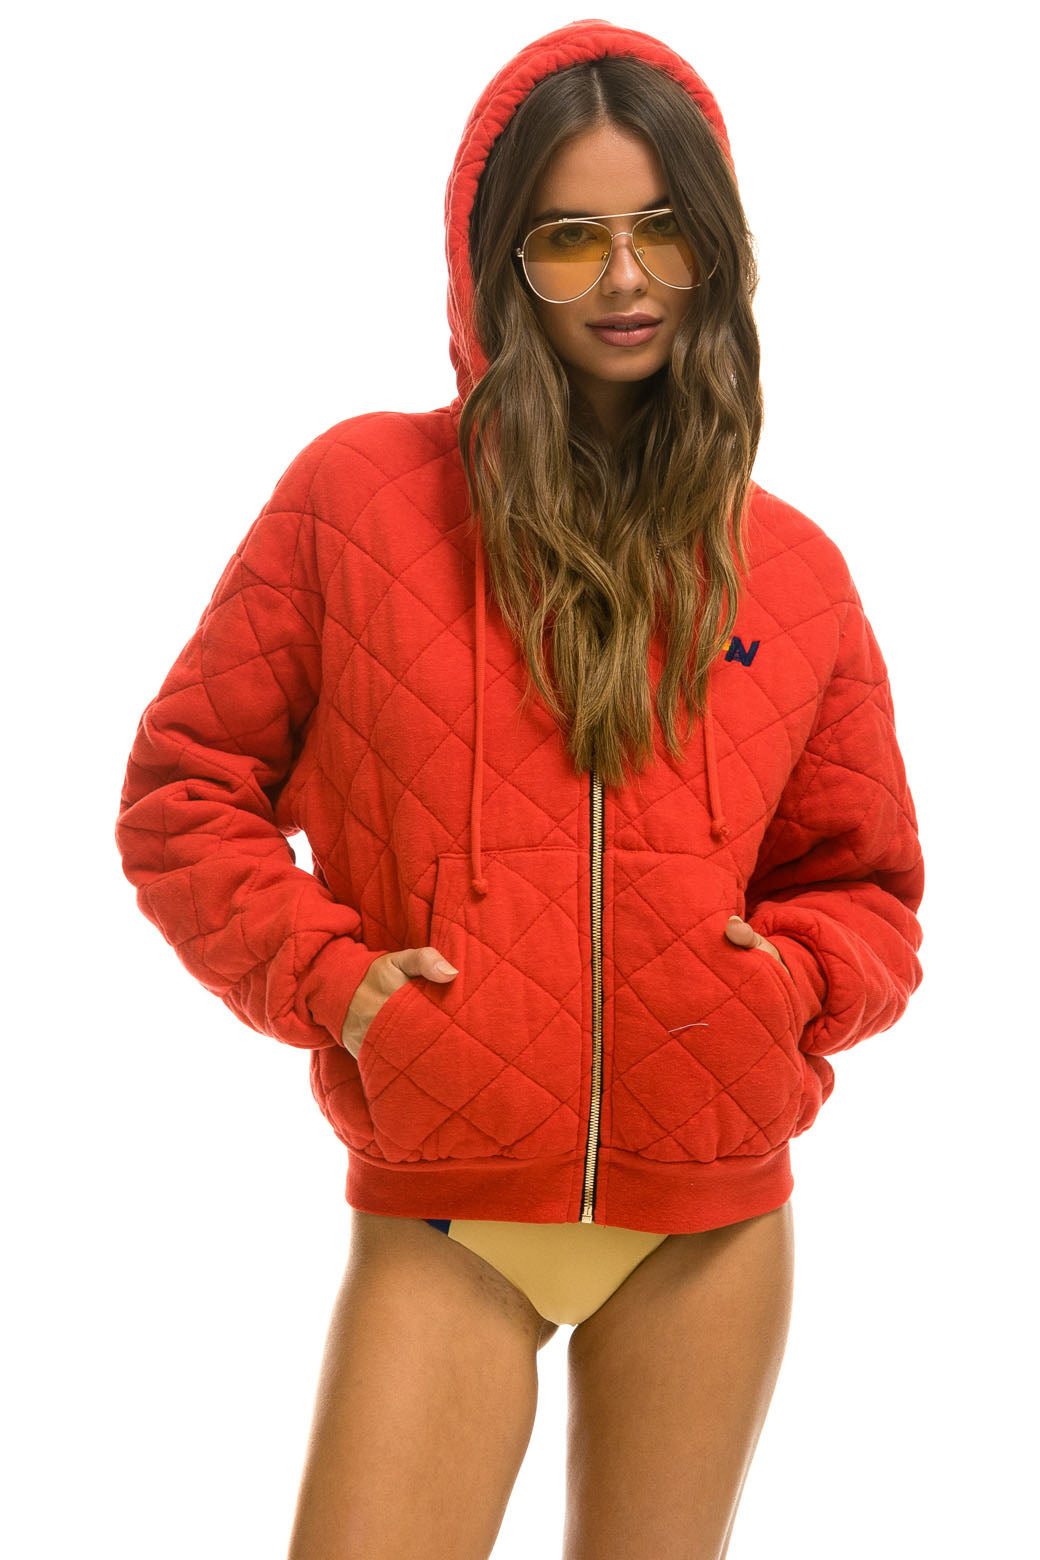 QUILTED ZIP HOODIE RELAXED - RED Hoodie Aviator Nation 